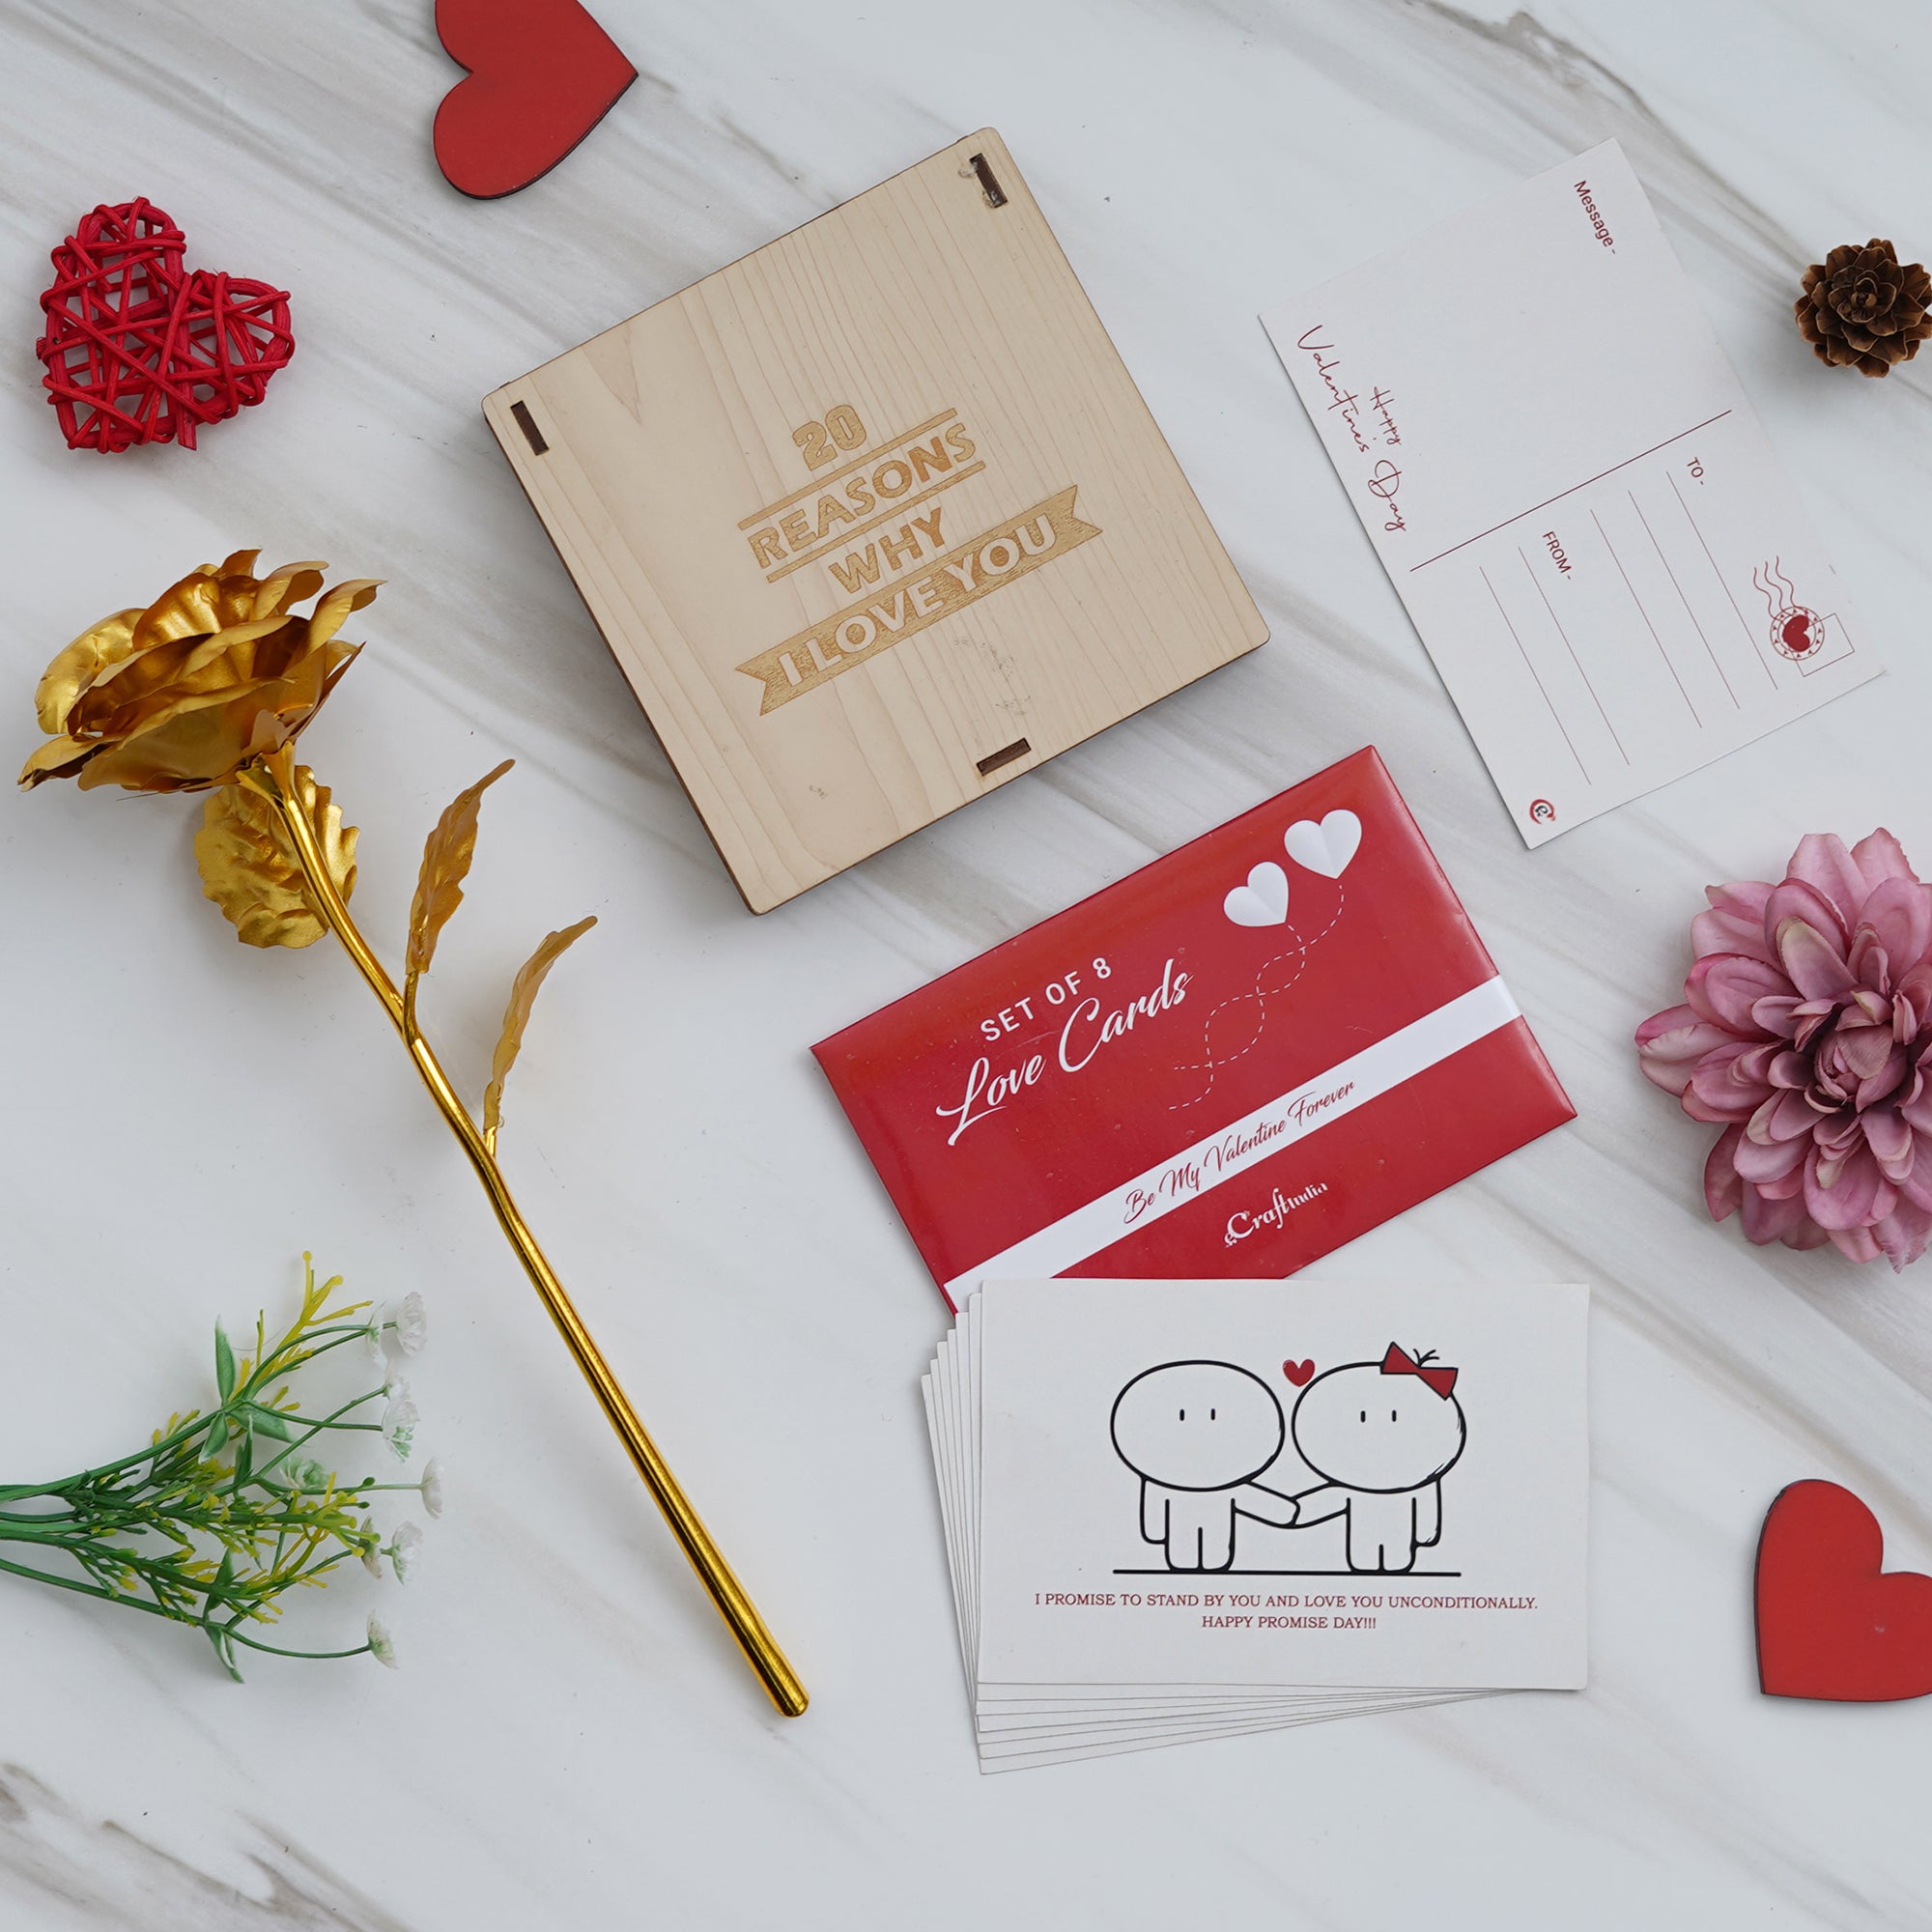 Valentine Combo of Set of 8 Love Post Cards Gift Cards Set, Golden Rose Gift Set, "20 Reasons Why I Love You" Printed on Little Hearts Wooden Gift Set